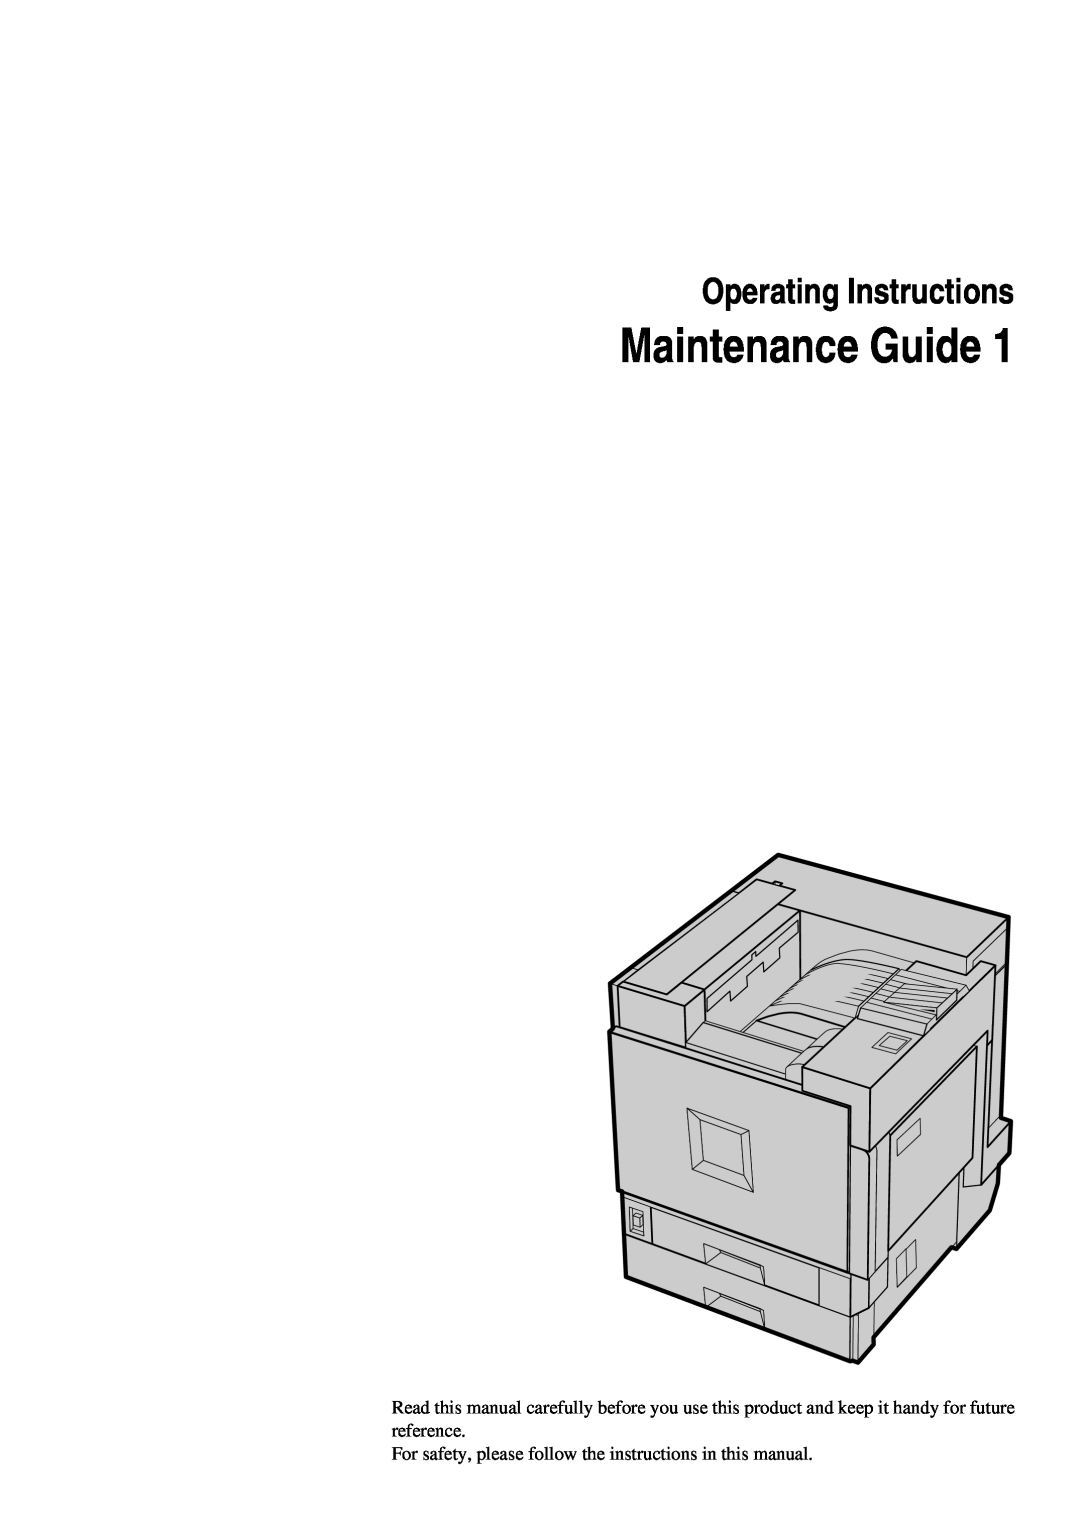 Savin SLP38C manual Maintenance Guide, Operating Instructions, For safety, please follow the instructions in this manual 